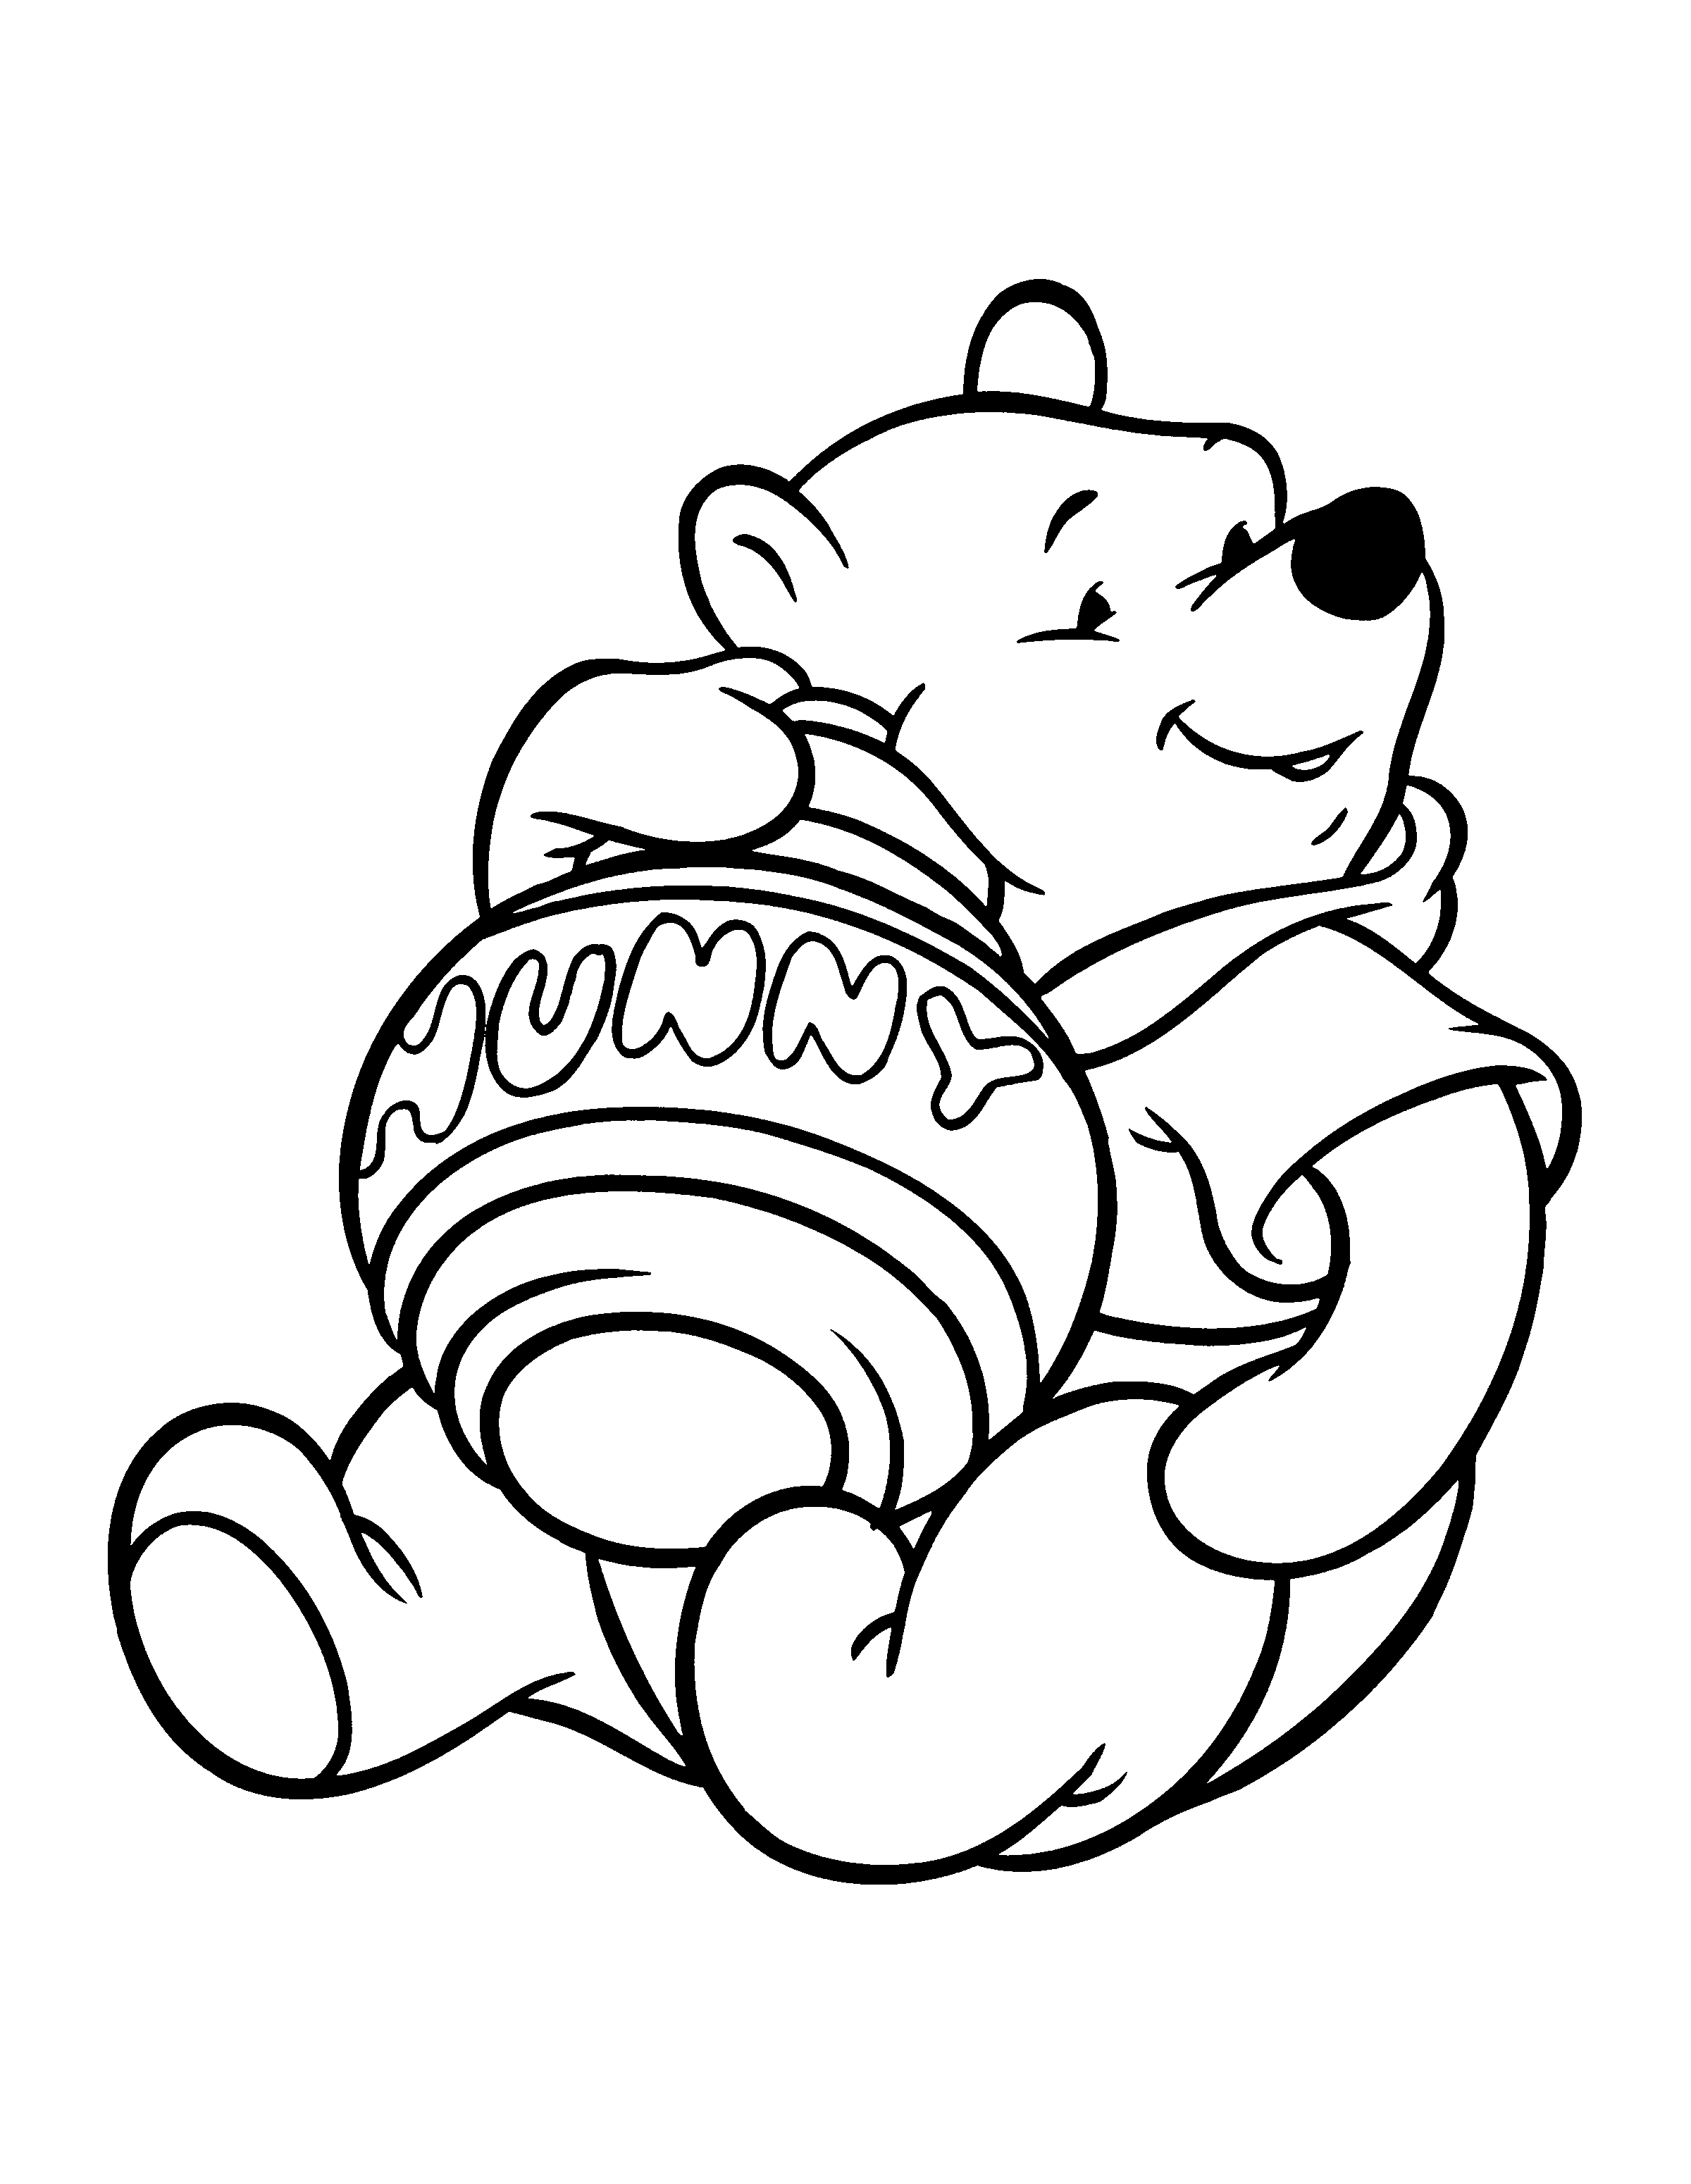 Winnie The Pooh Coloring Page Tv Series Coloring Page ...